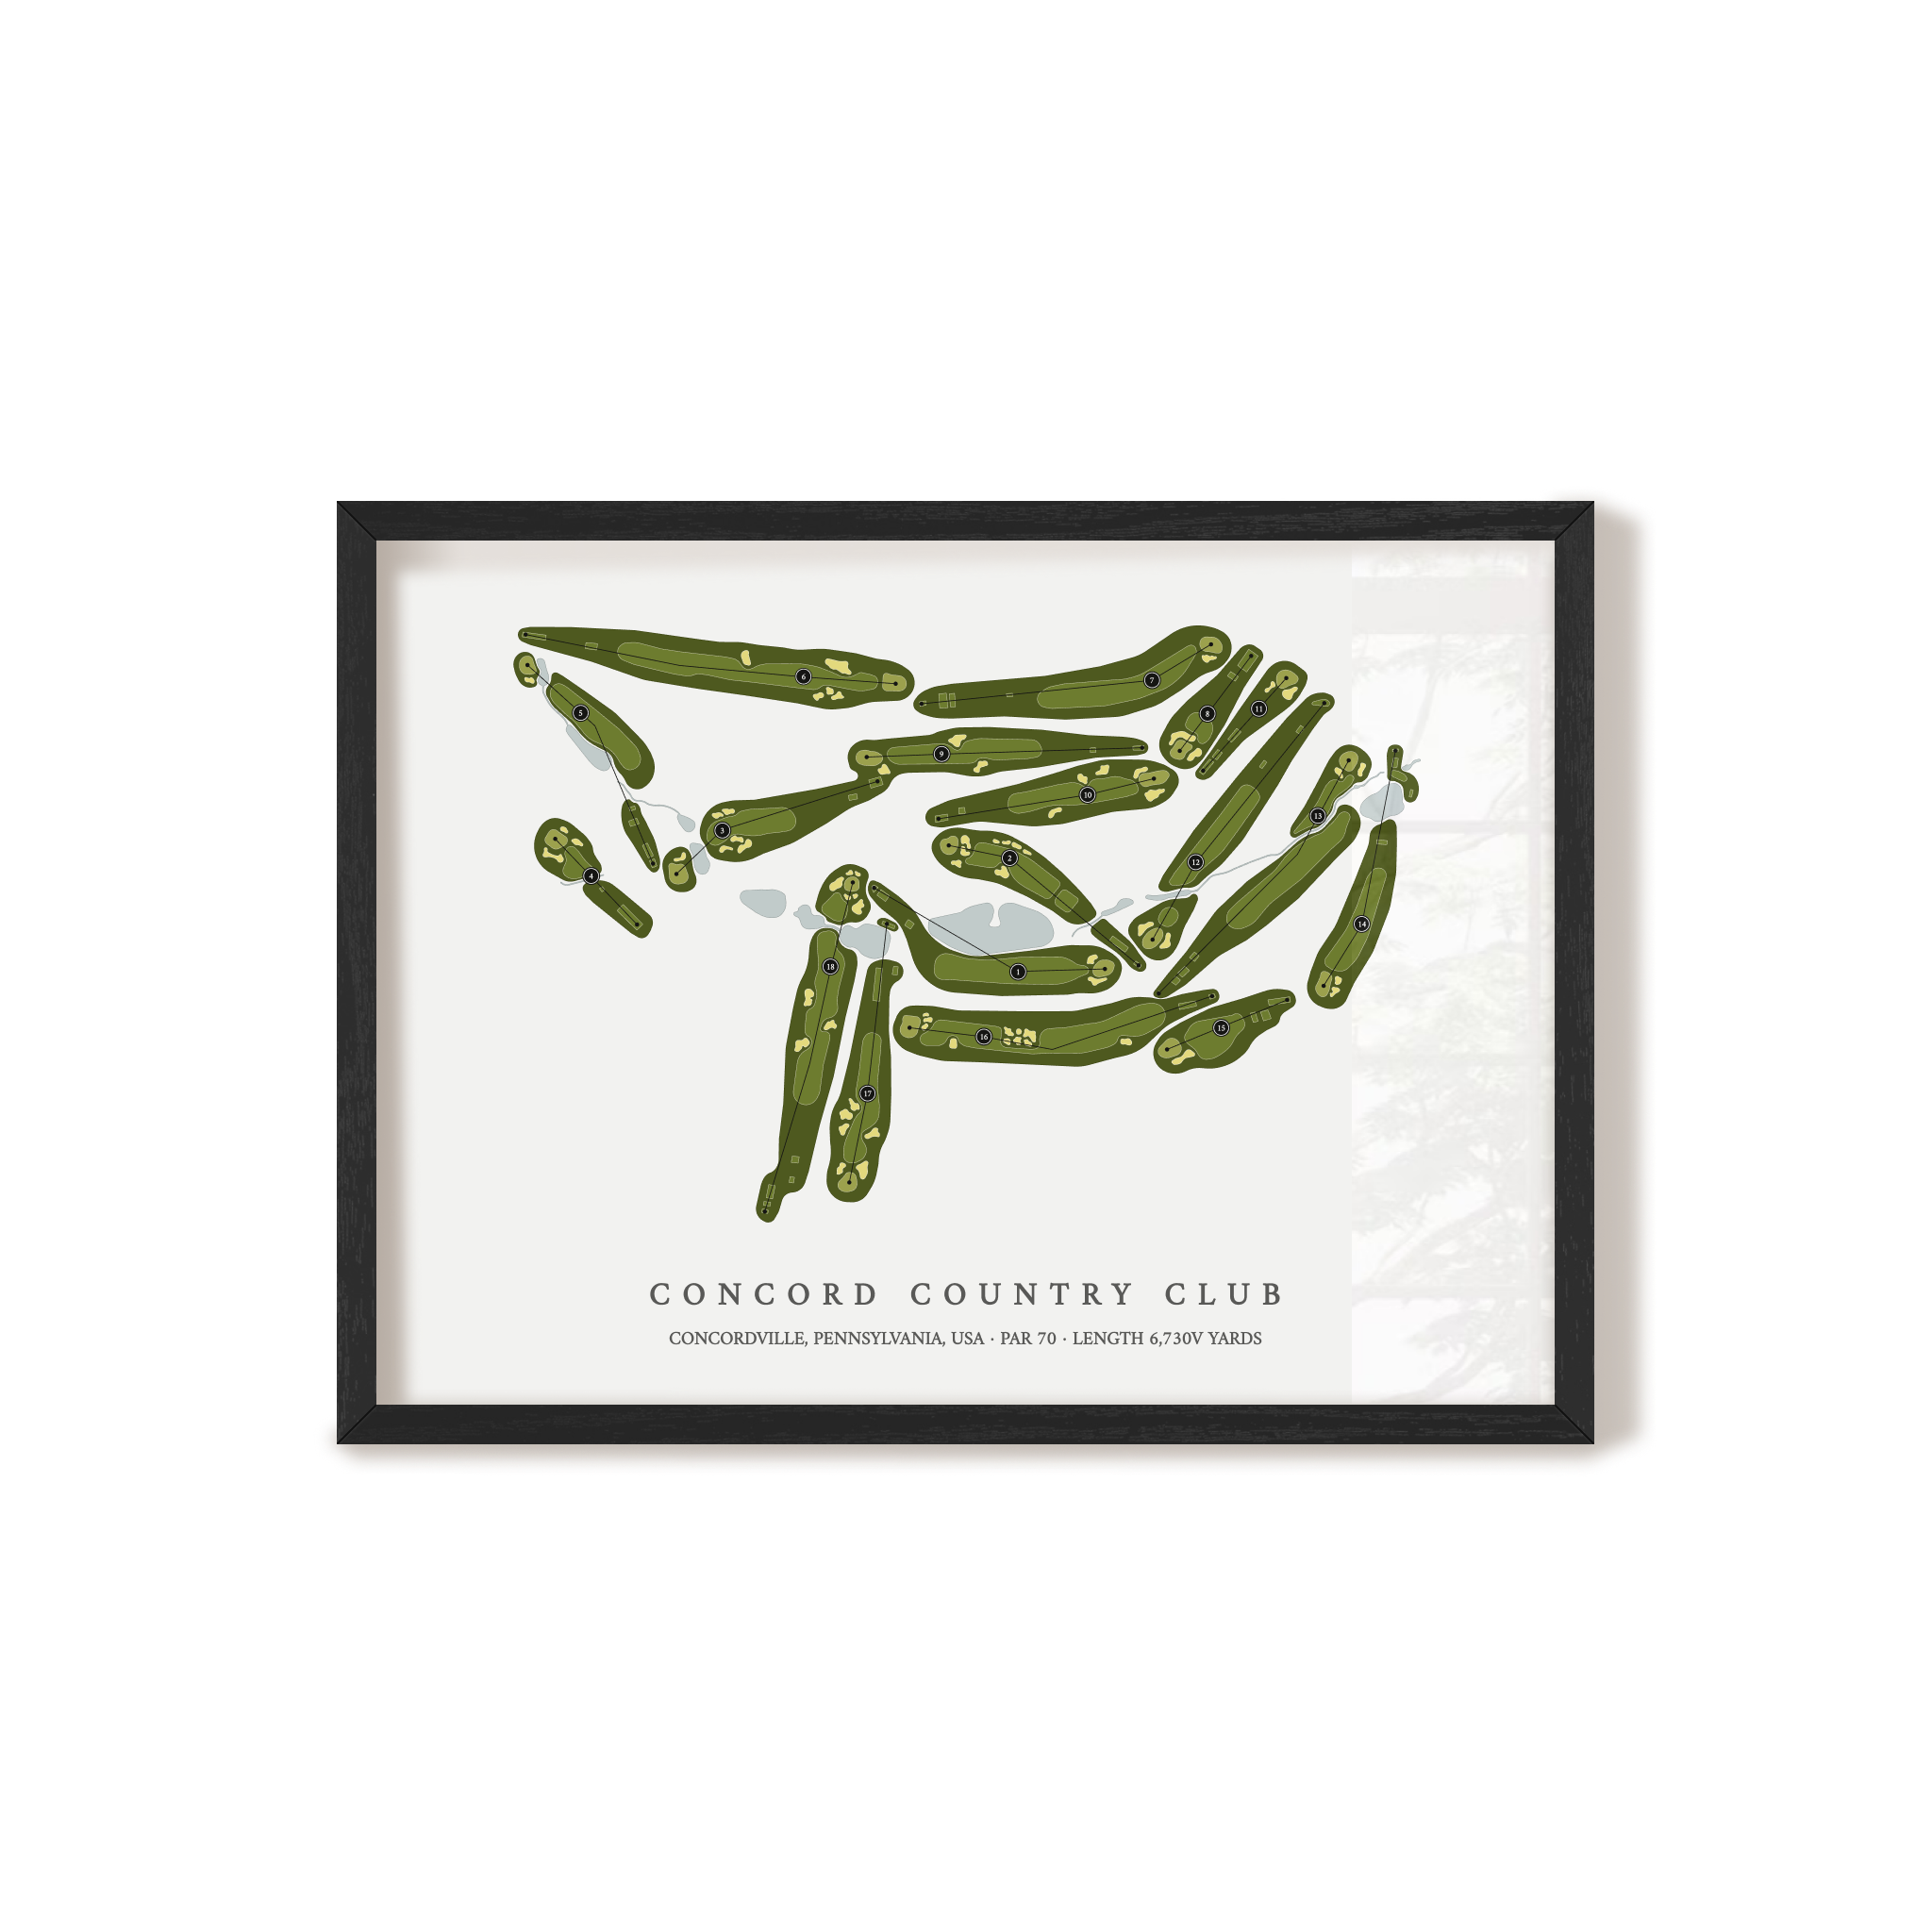 Concord Country Club | Golf Course Map | Black Frame 